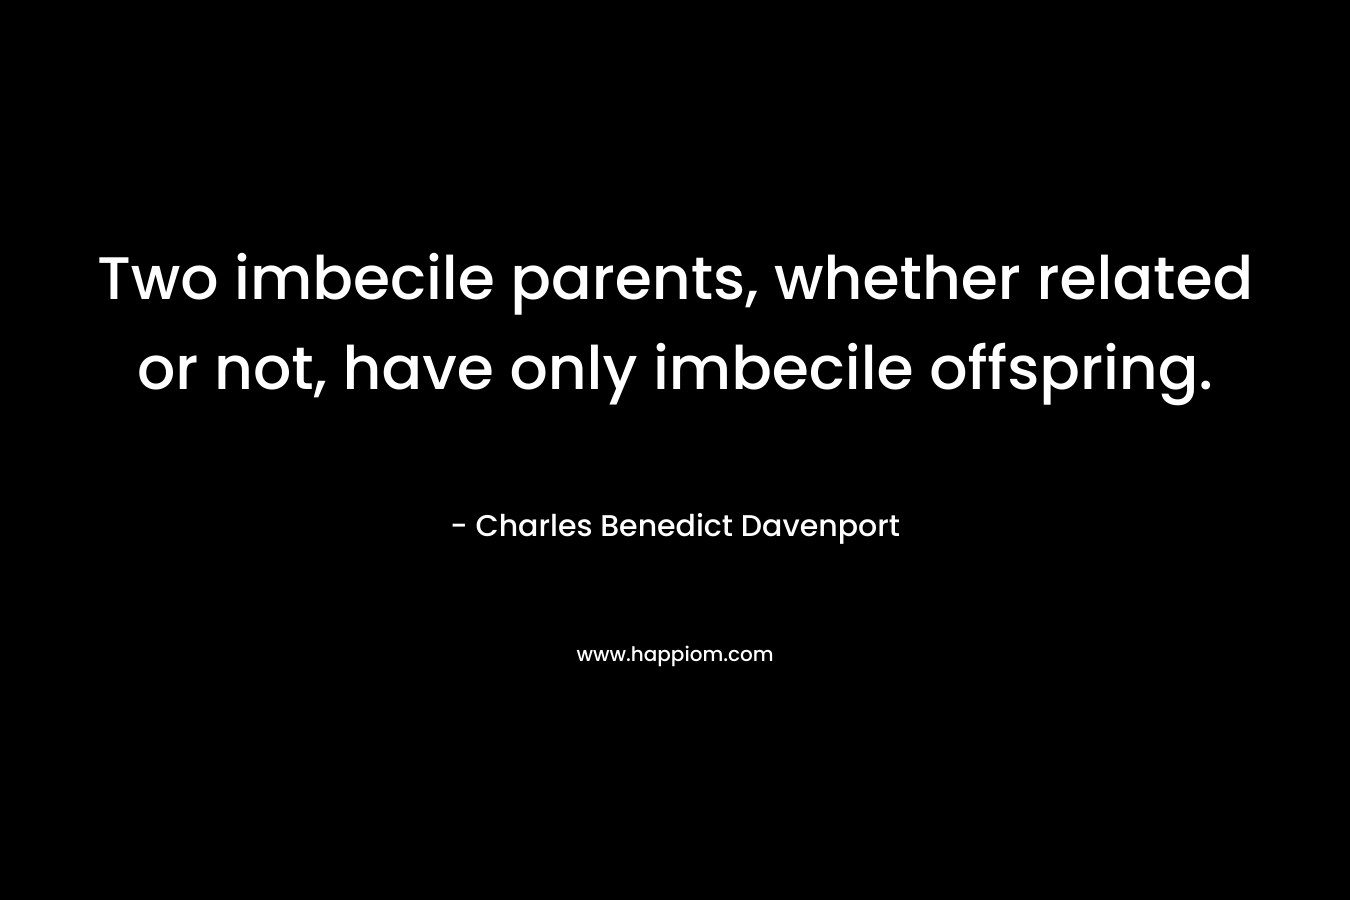 Two imbecile parents, whether related or not, have only imbecile offspring. – Charles Benedict Davenport